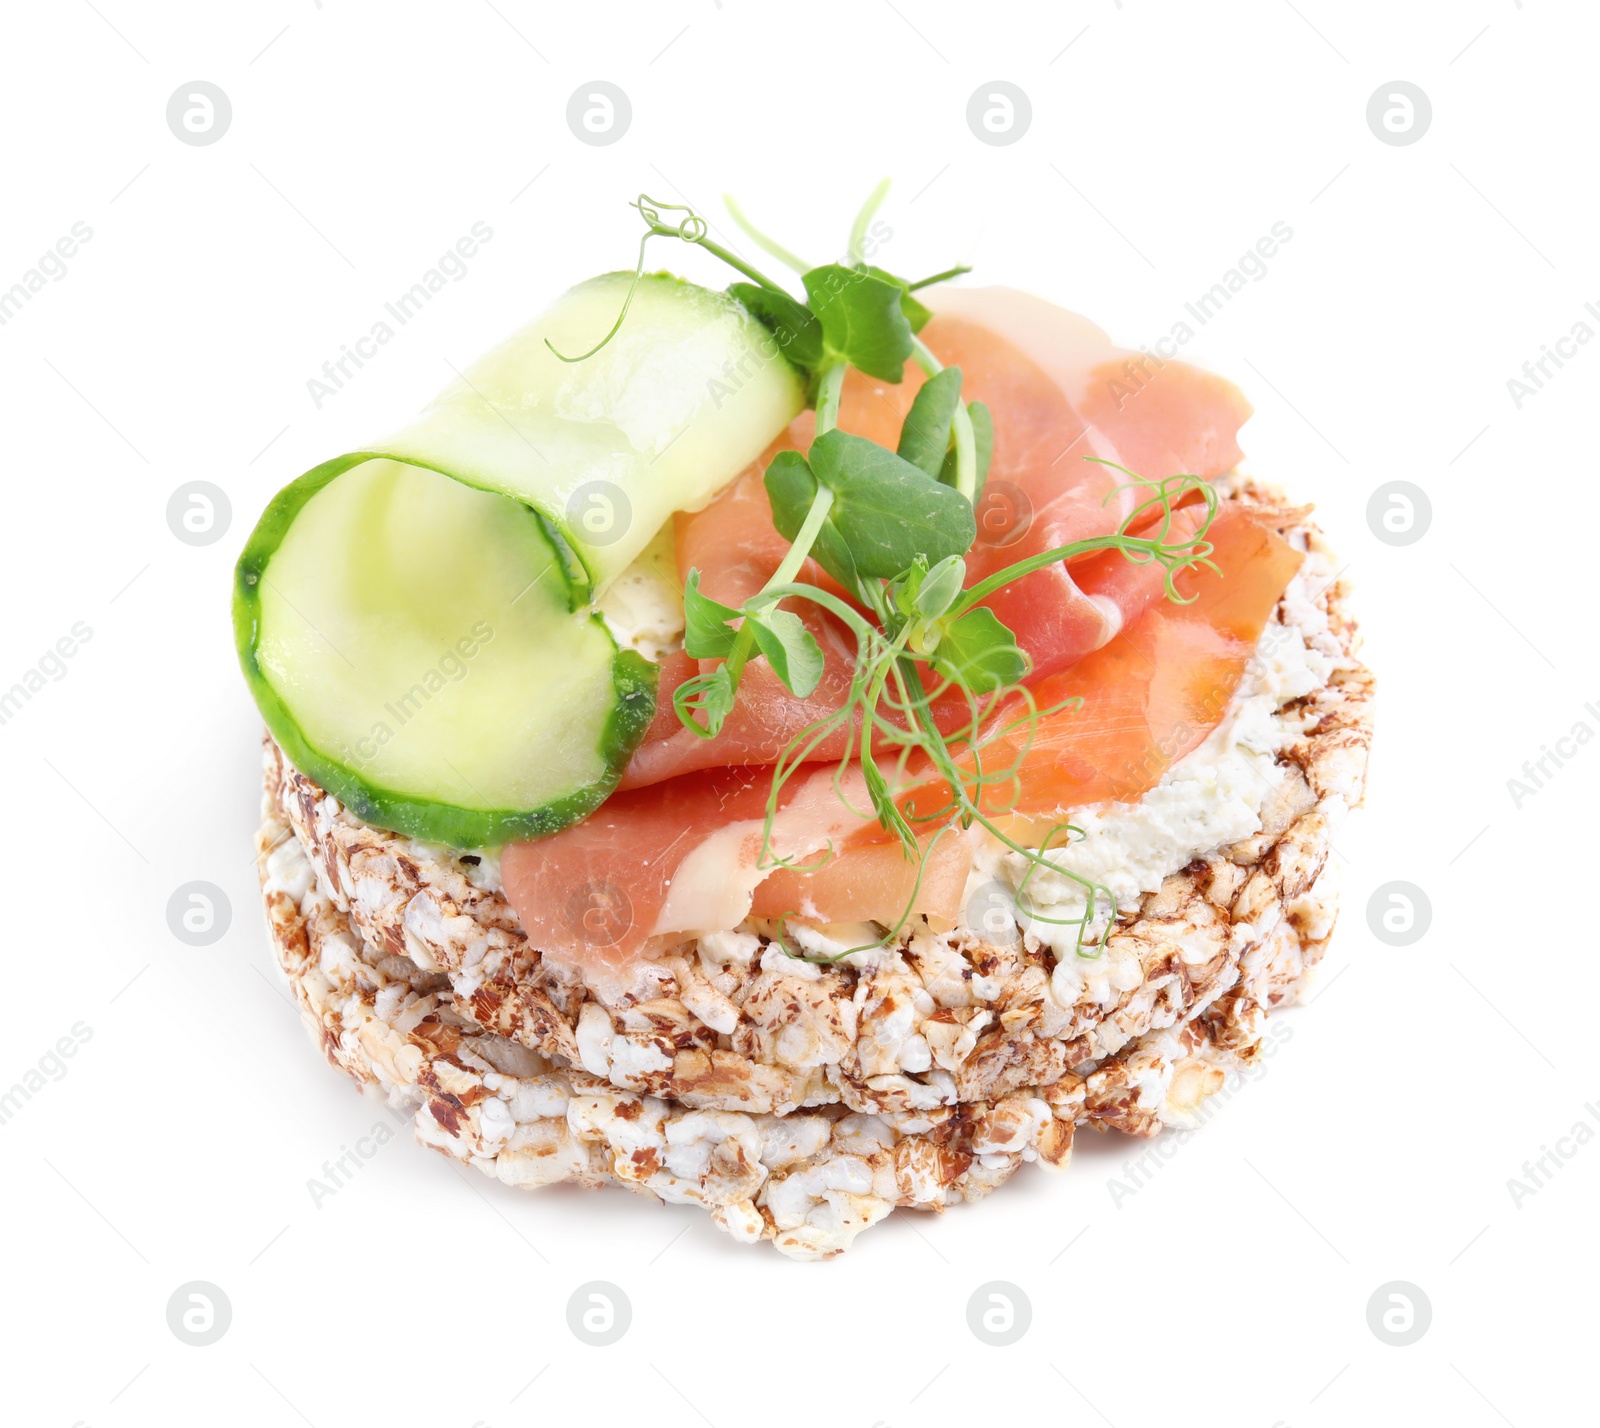 Photo of Crunchy buckwheat cakes with cream cheese, prosciutto and cucumber slice isolated on white